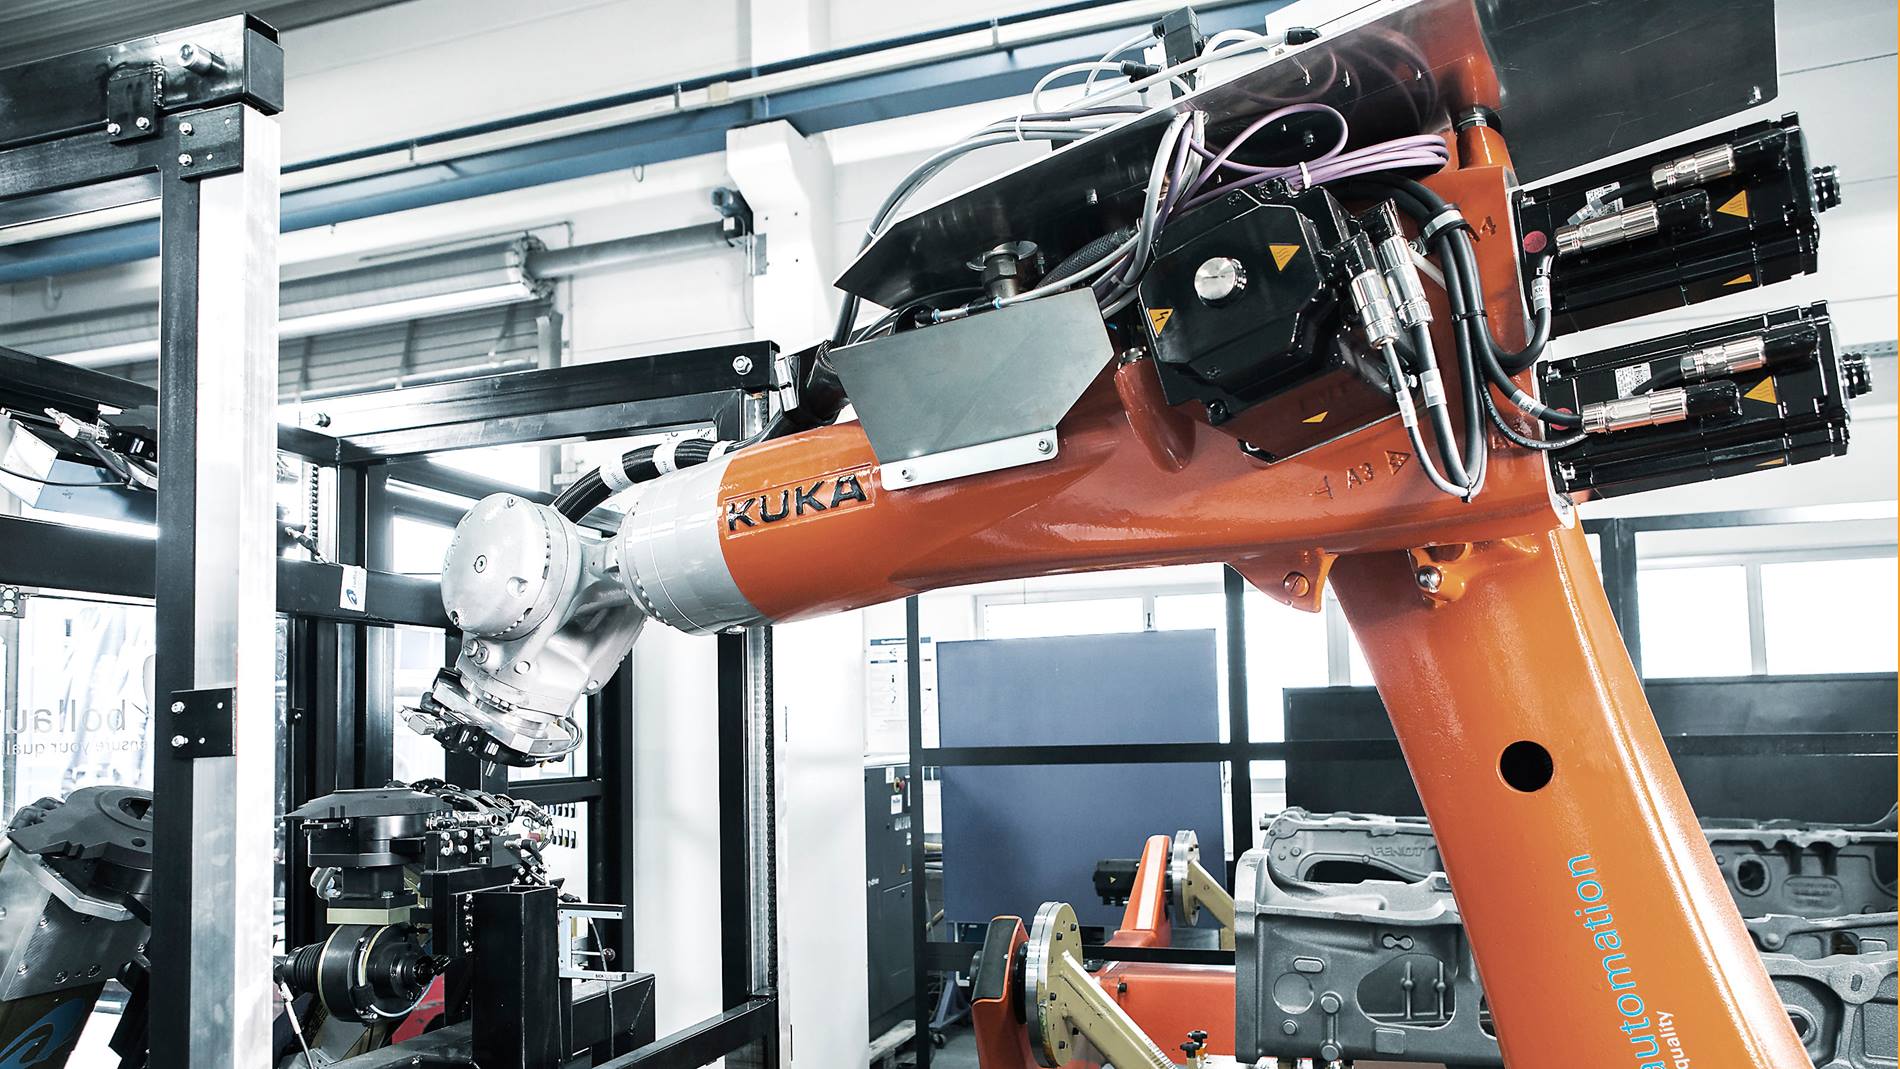 The foundry version of the KR QUANTEC robot is protected from heat, corrosion, bases and acids through use of special coatings